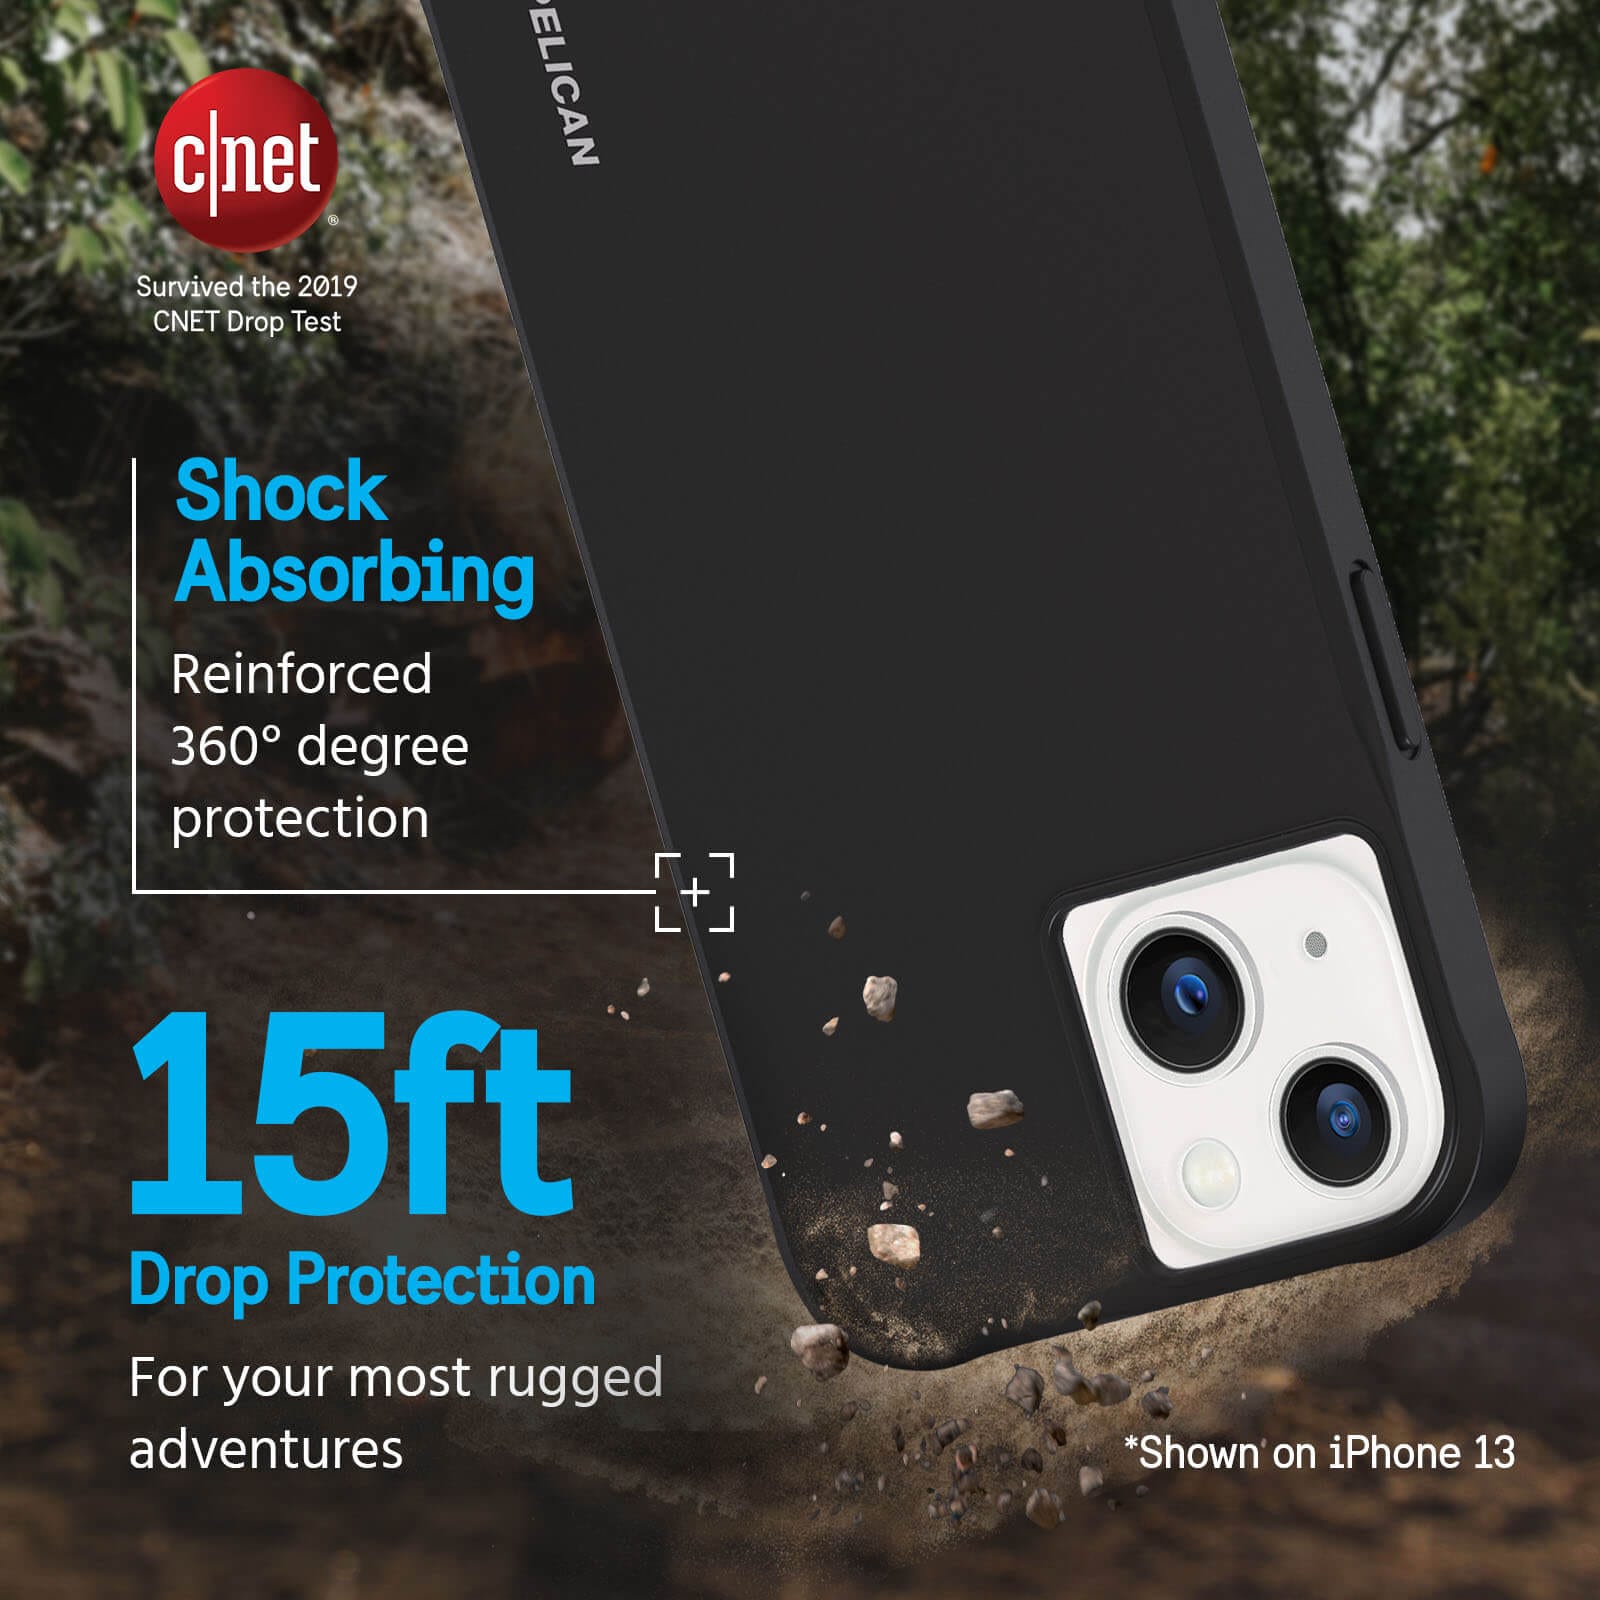 Survived the 2019 CNET Drop Test. Shock Absorbing reinforced 360 degree protection. 15ft Drop Protection for your most rugged adventures. *Shown on iPhone 13. color::Black